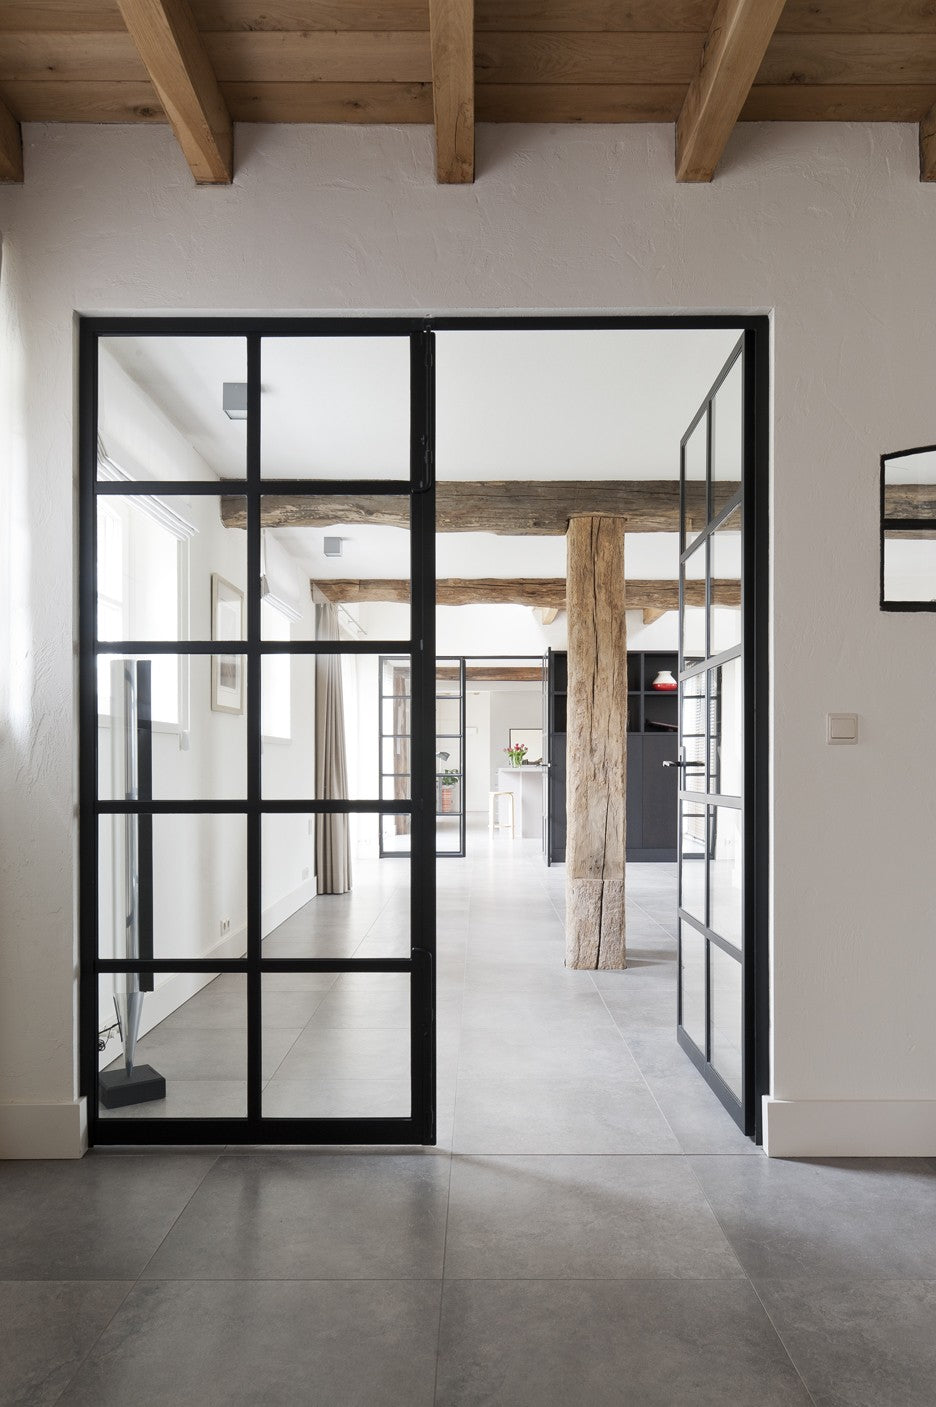 I loved the open feeling of this enfilade, and was inspired by the beams, the floors and the wrought iron windows. From architect-web-nl. on Pinterest.